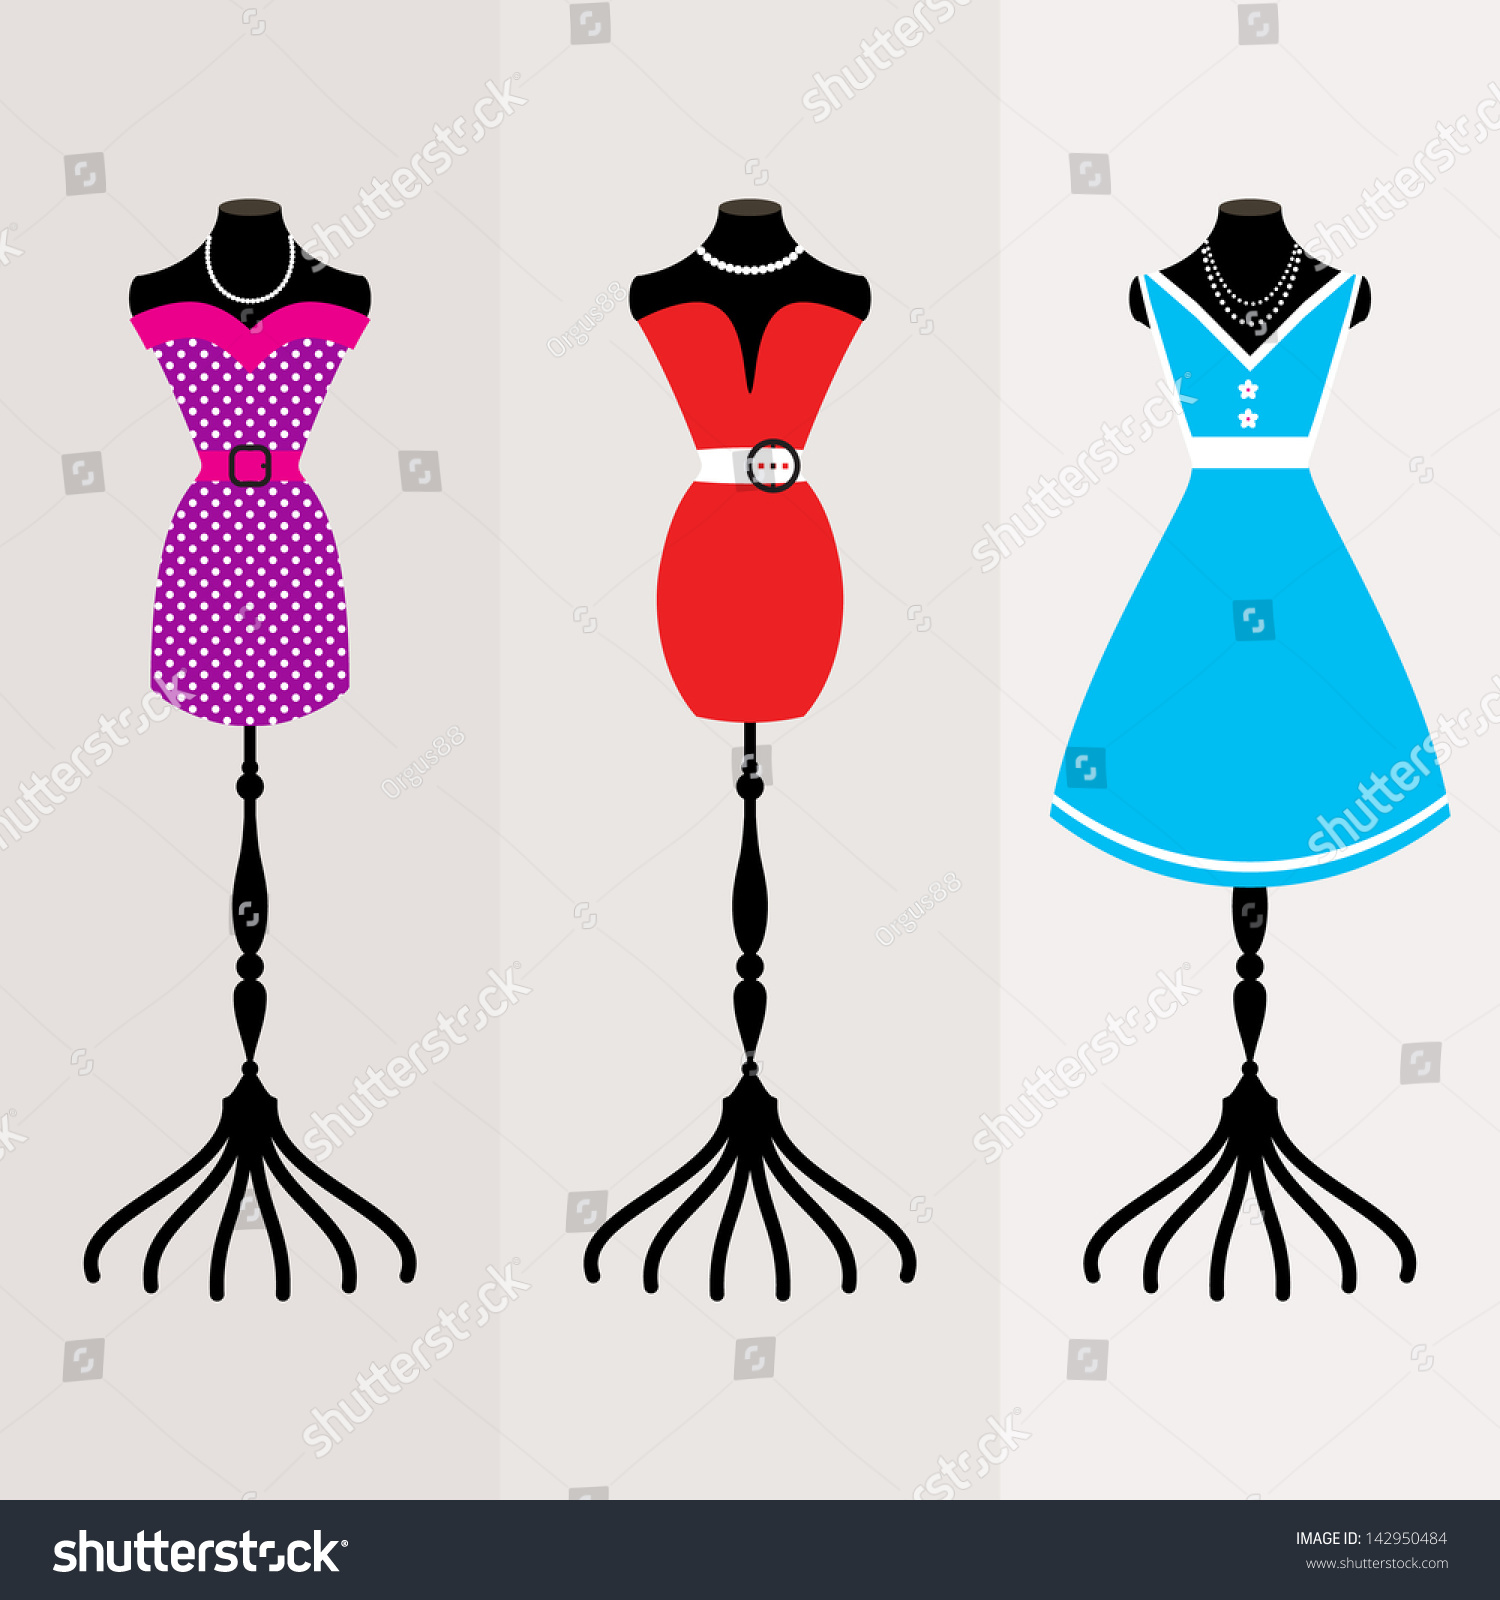 Body Forms For Fashion Design | Best Funny Images